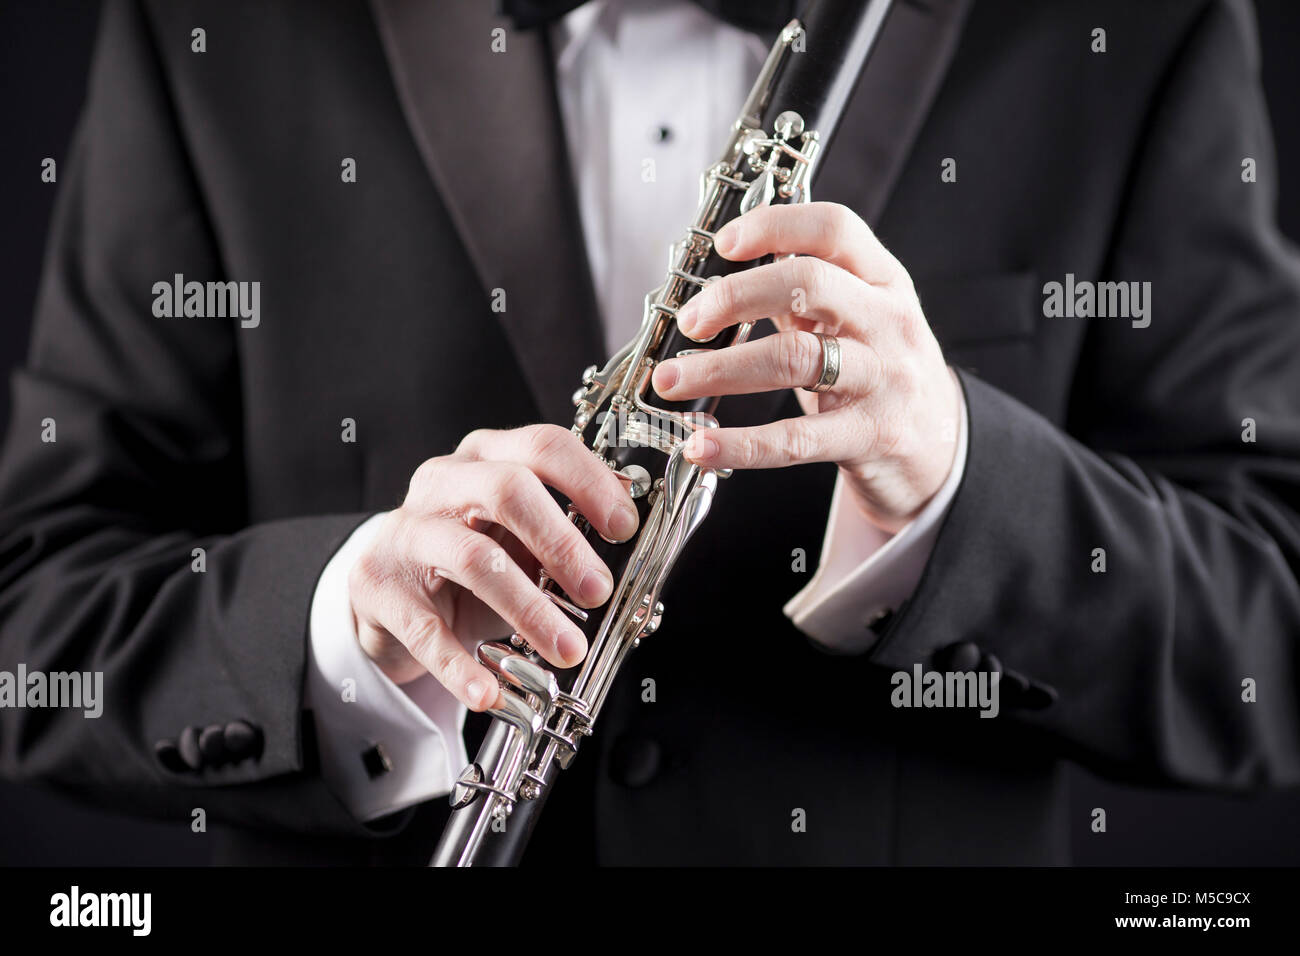 Man in tuxedo holding clarinet, gros plan Banque D'Images